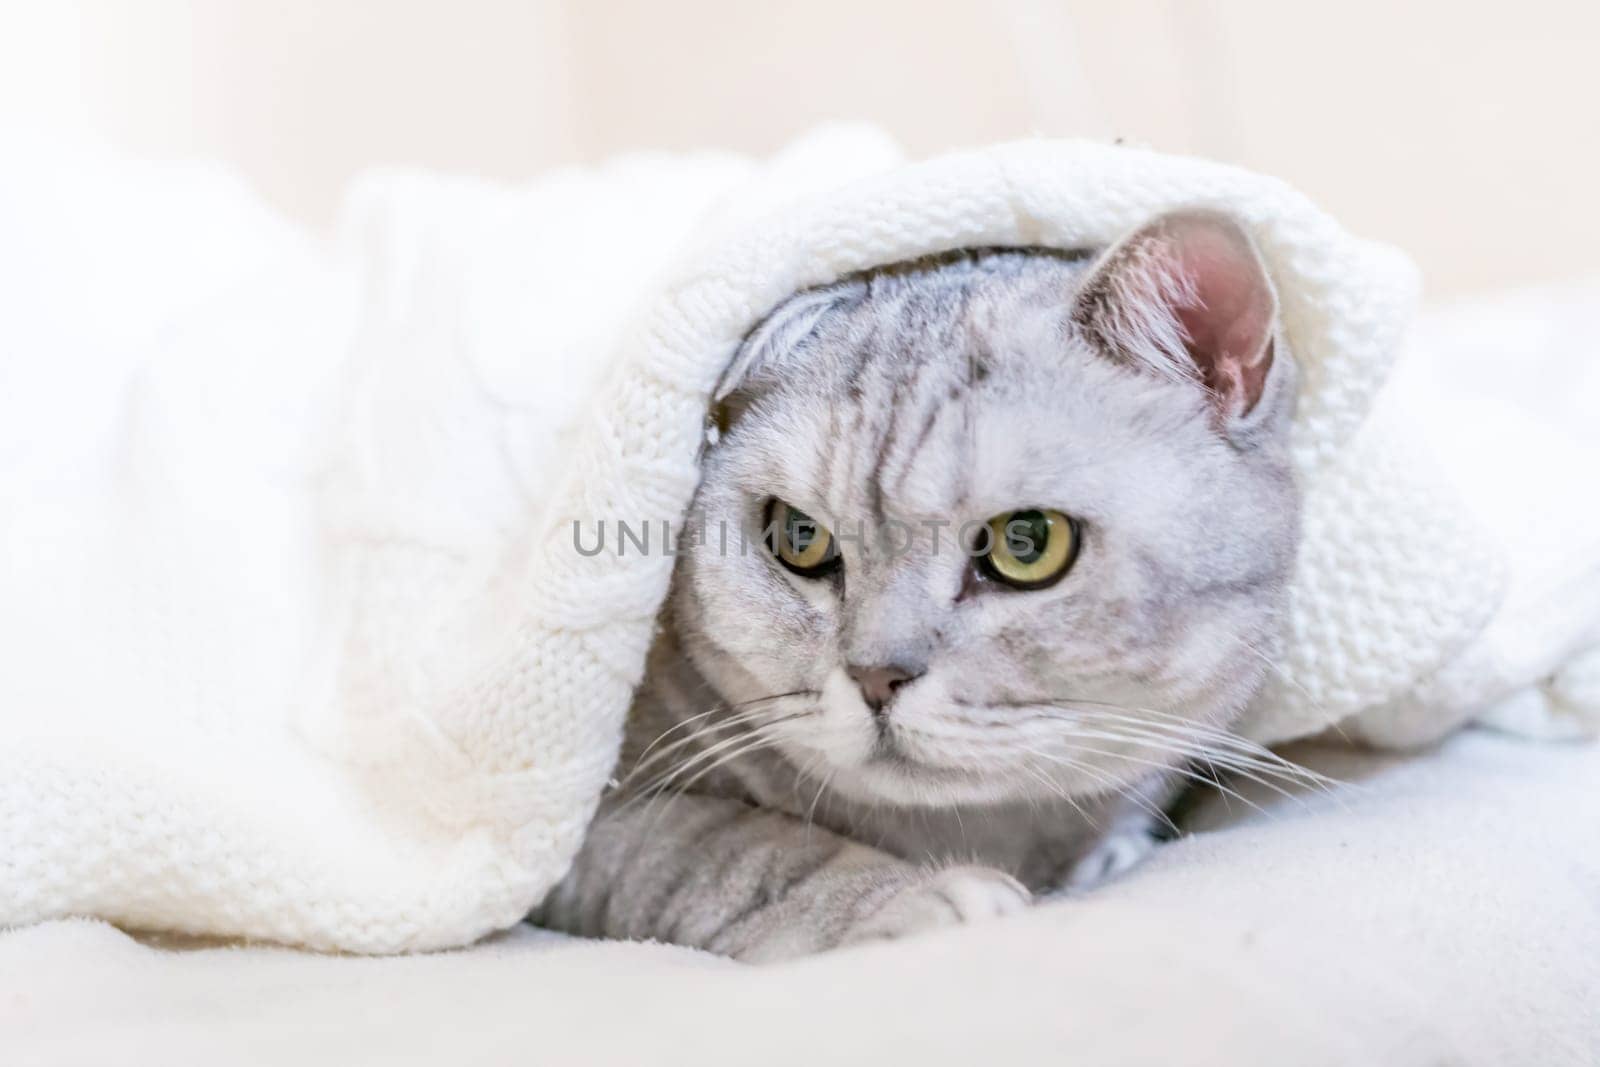 Relaxed Scottish cat wrapped in white blanket muzzle close up. Where: Unspecified location. Comfortable setting. Conveying cat's relaxation in cozy blanket